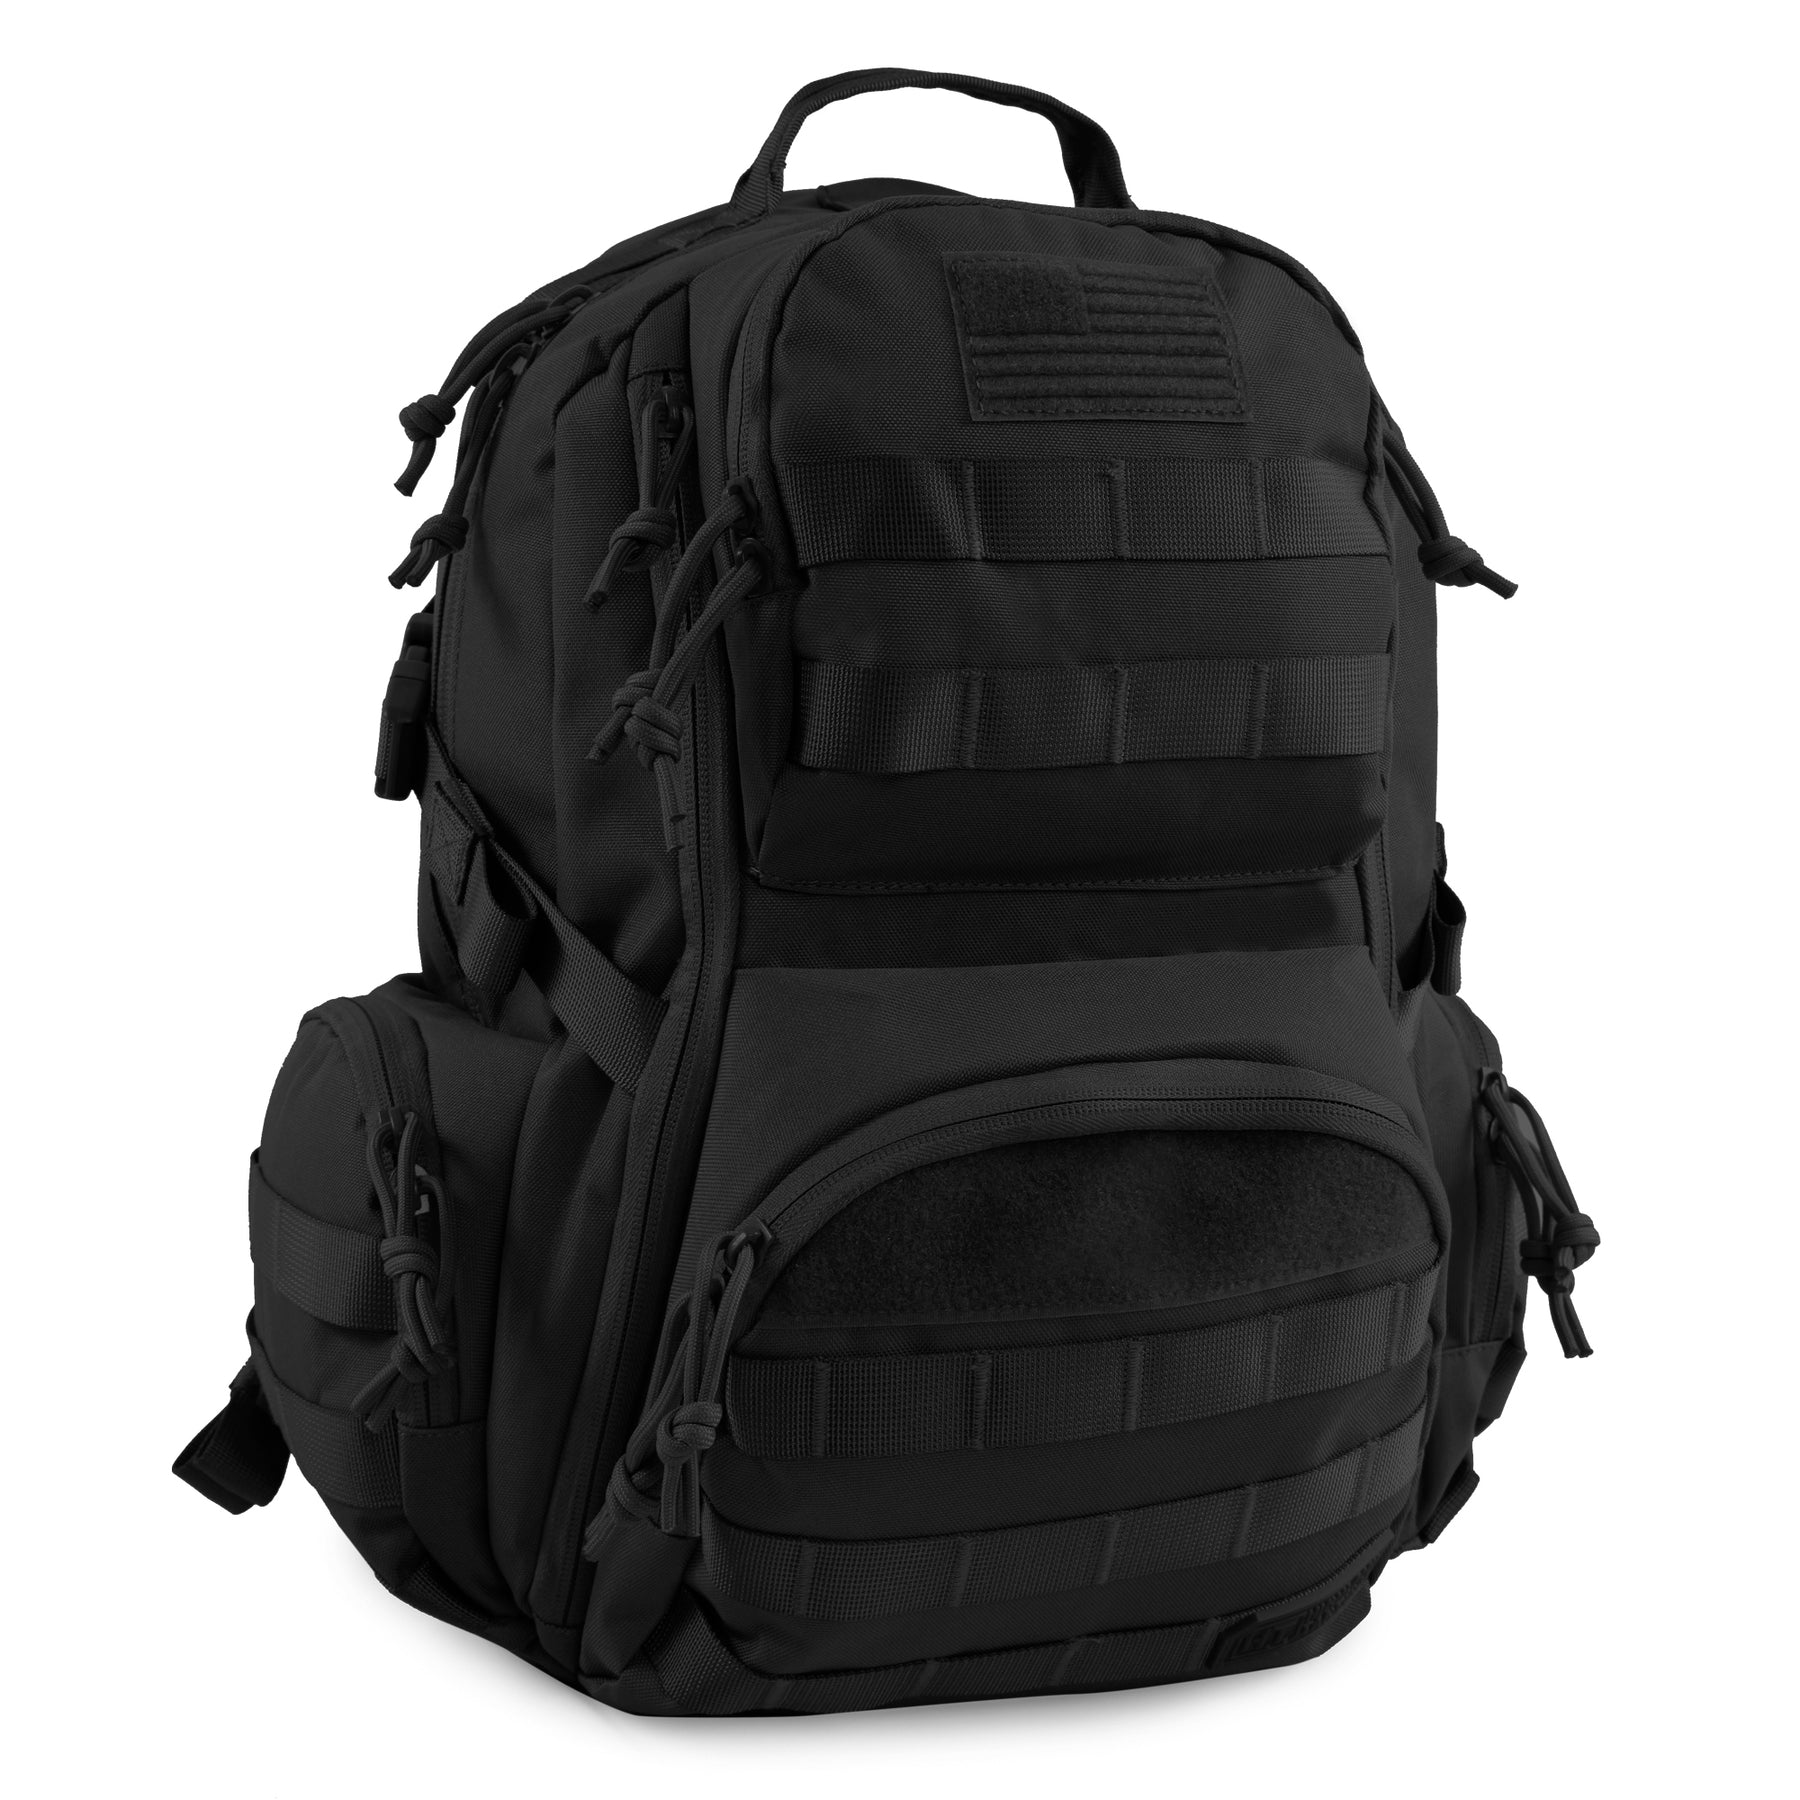 Crusher 2 Day Backpack | Durable Tactical Pack | Police & Outdoor ...